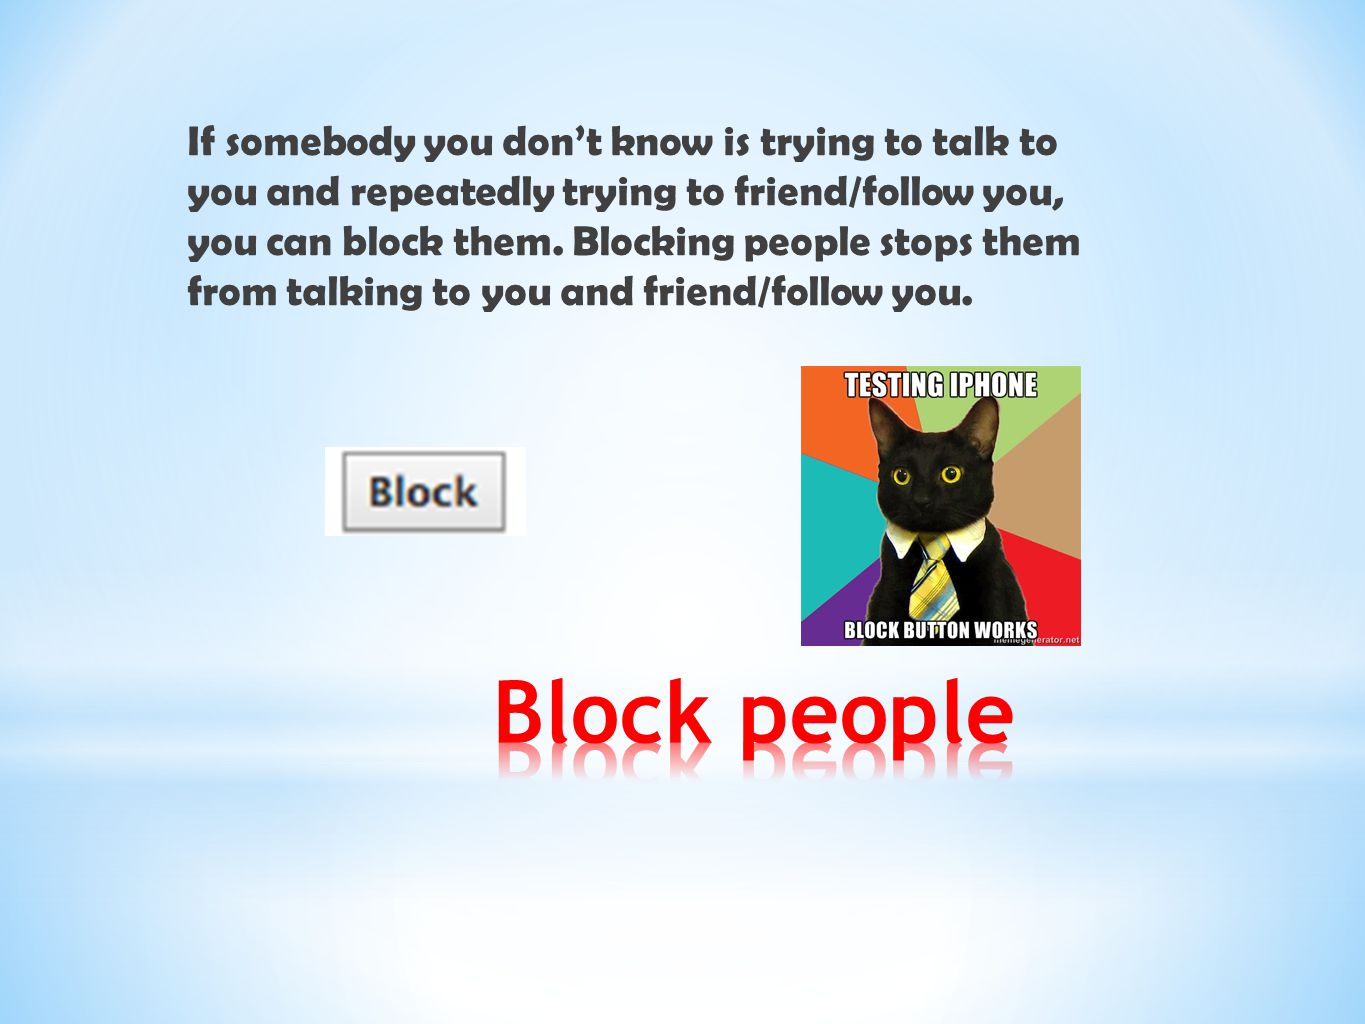 If somebody you don’t know is trying to talk to you and repeatedly trying to friend/follow you, you can block them. Blocking people stops them from talking to you and friend/follow you.